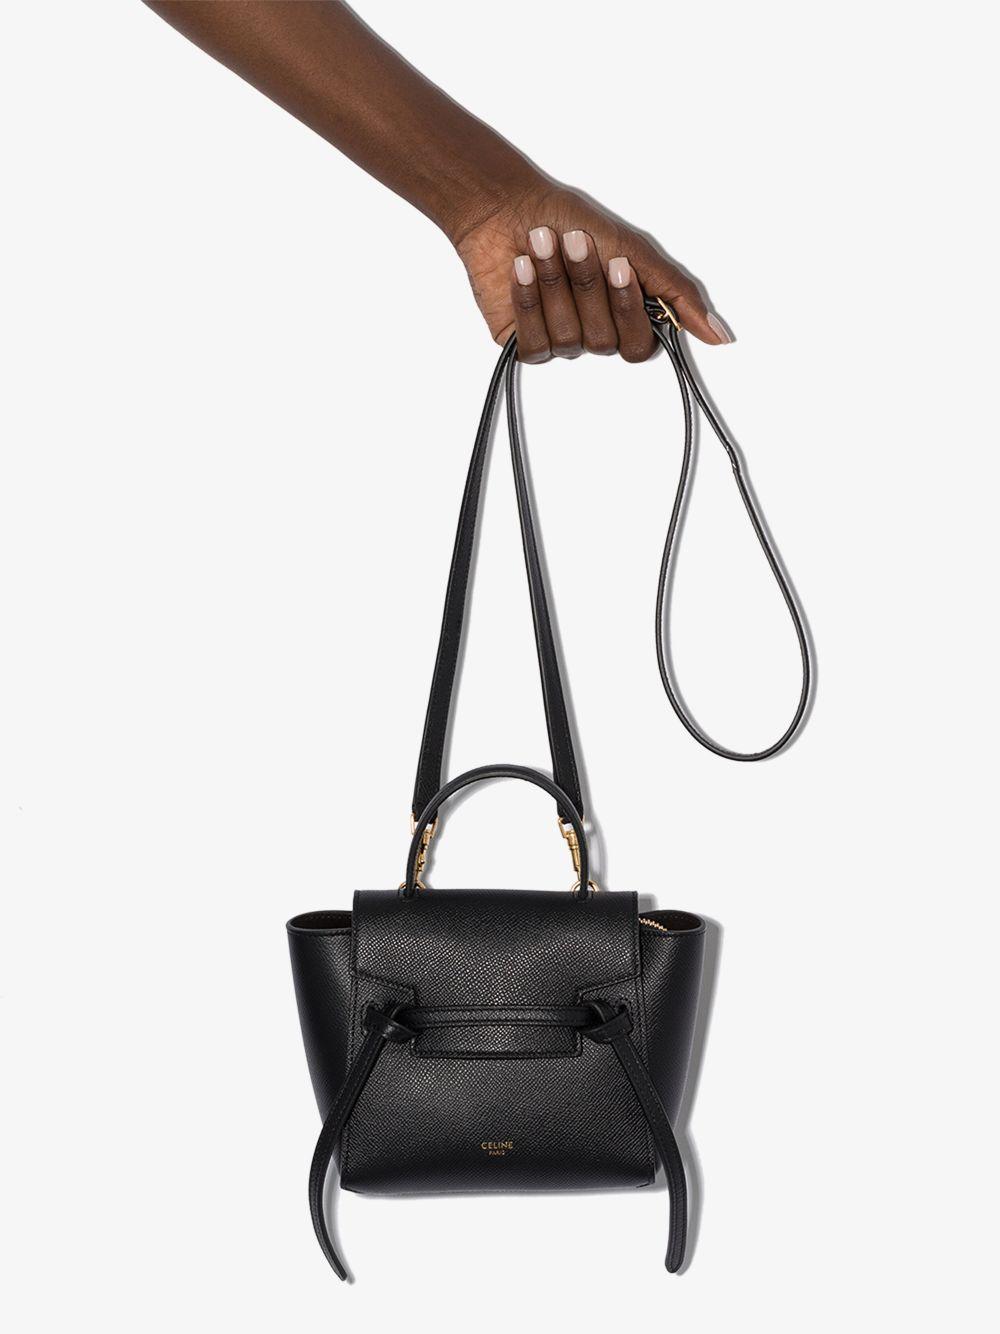 Grained Calfskin Pico Belt Bag Designer Womens Handbag With Nano Luxury  Finish, Shoulder Small Leather Tote Bag, Micro Belt, And Vintage Crossbody  Style From Isupreme, $57 | DHgate.Com